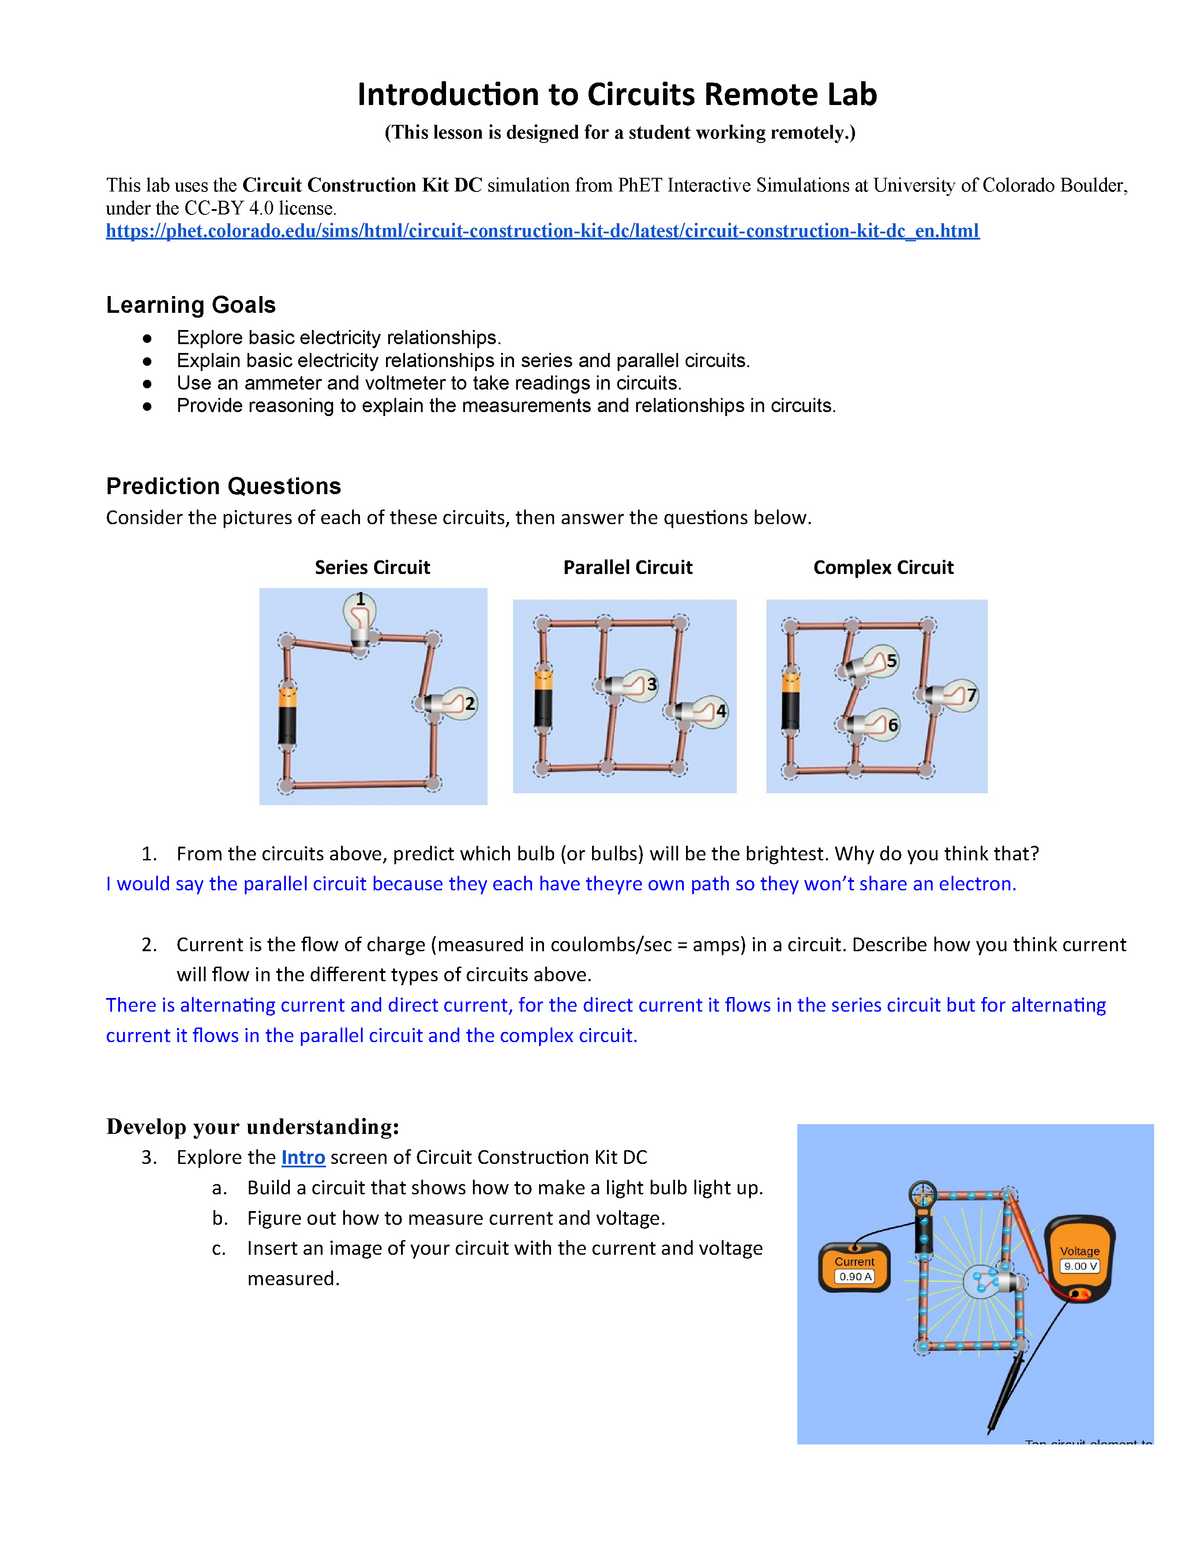 introduction-to-circuits-remote-lab-this-lesson-is-designed-for-a-student-working-remotely